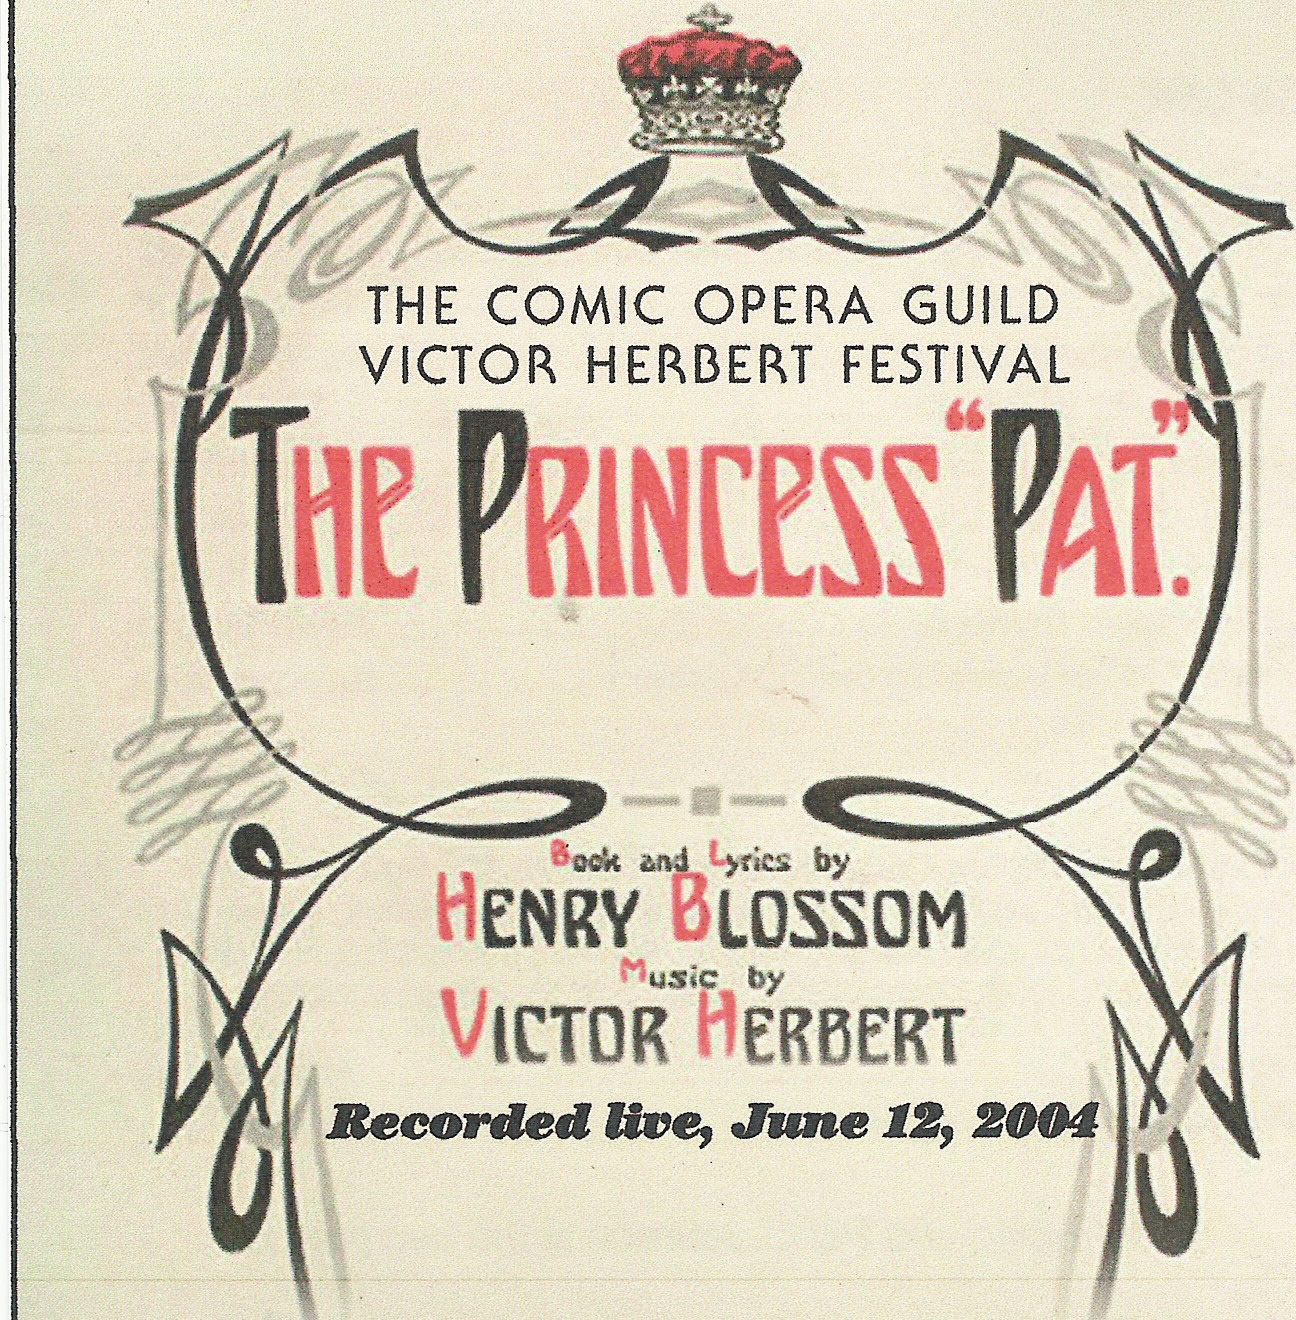 The Princess PatCD cover